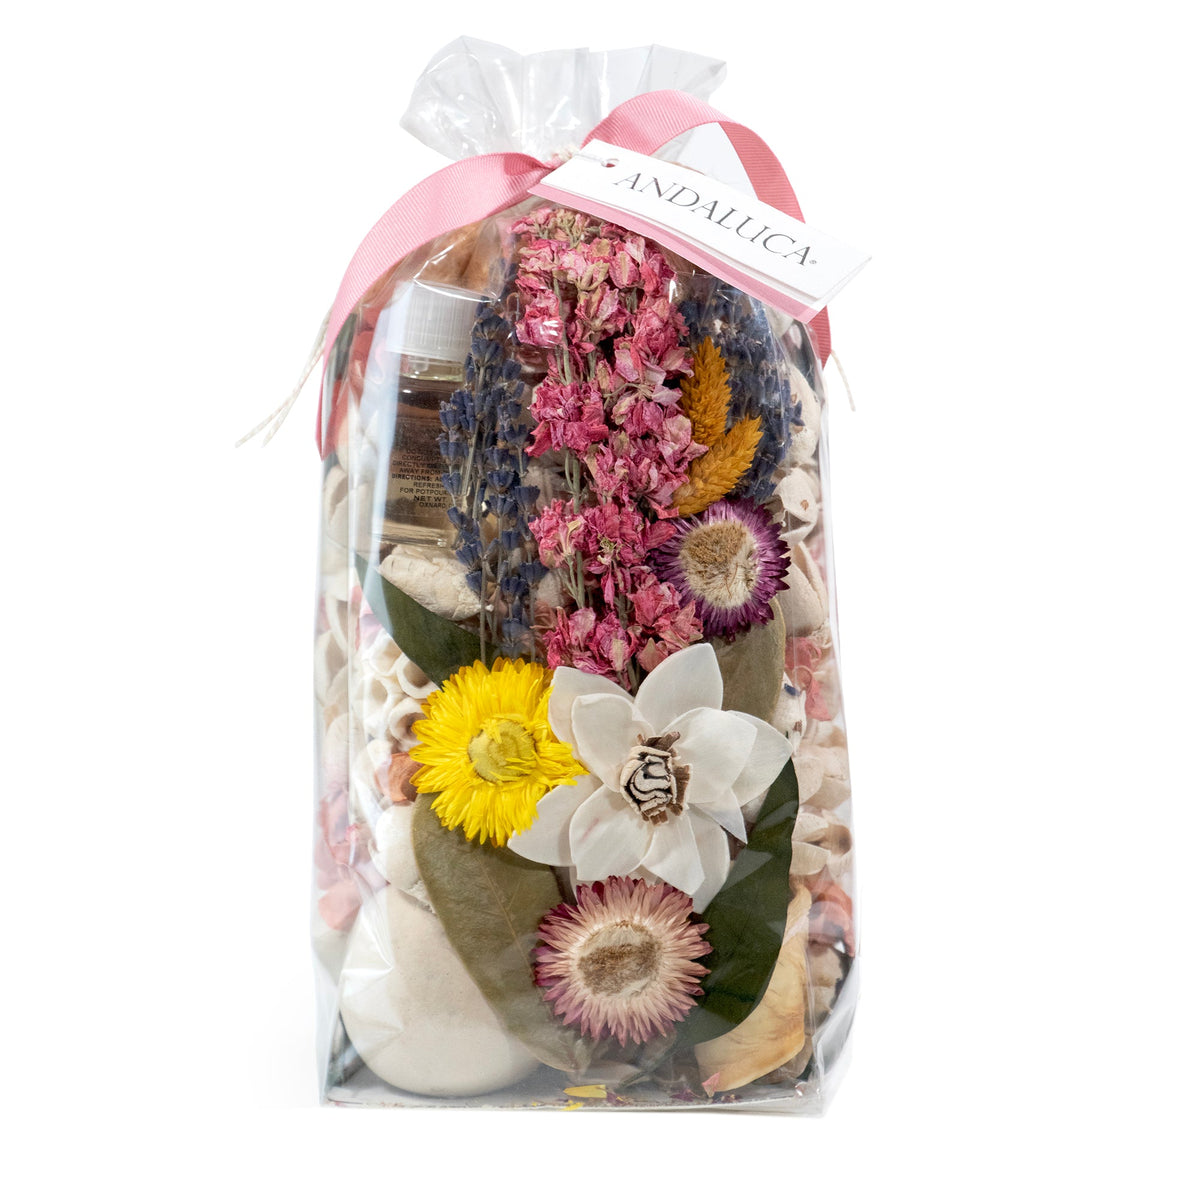 Secrets of Spring Potpourri by Andaluca Home